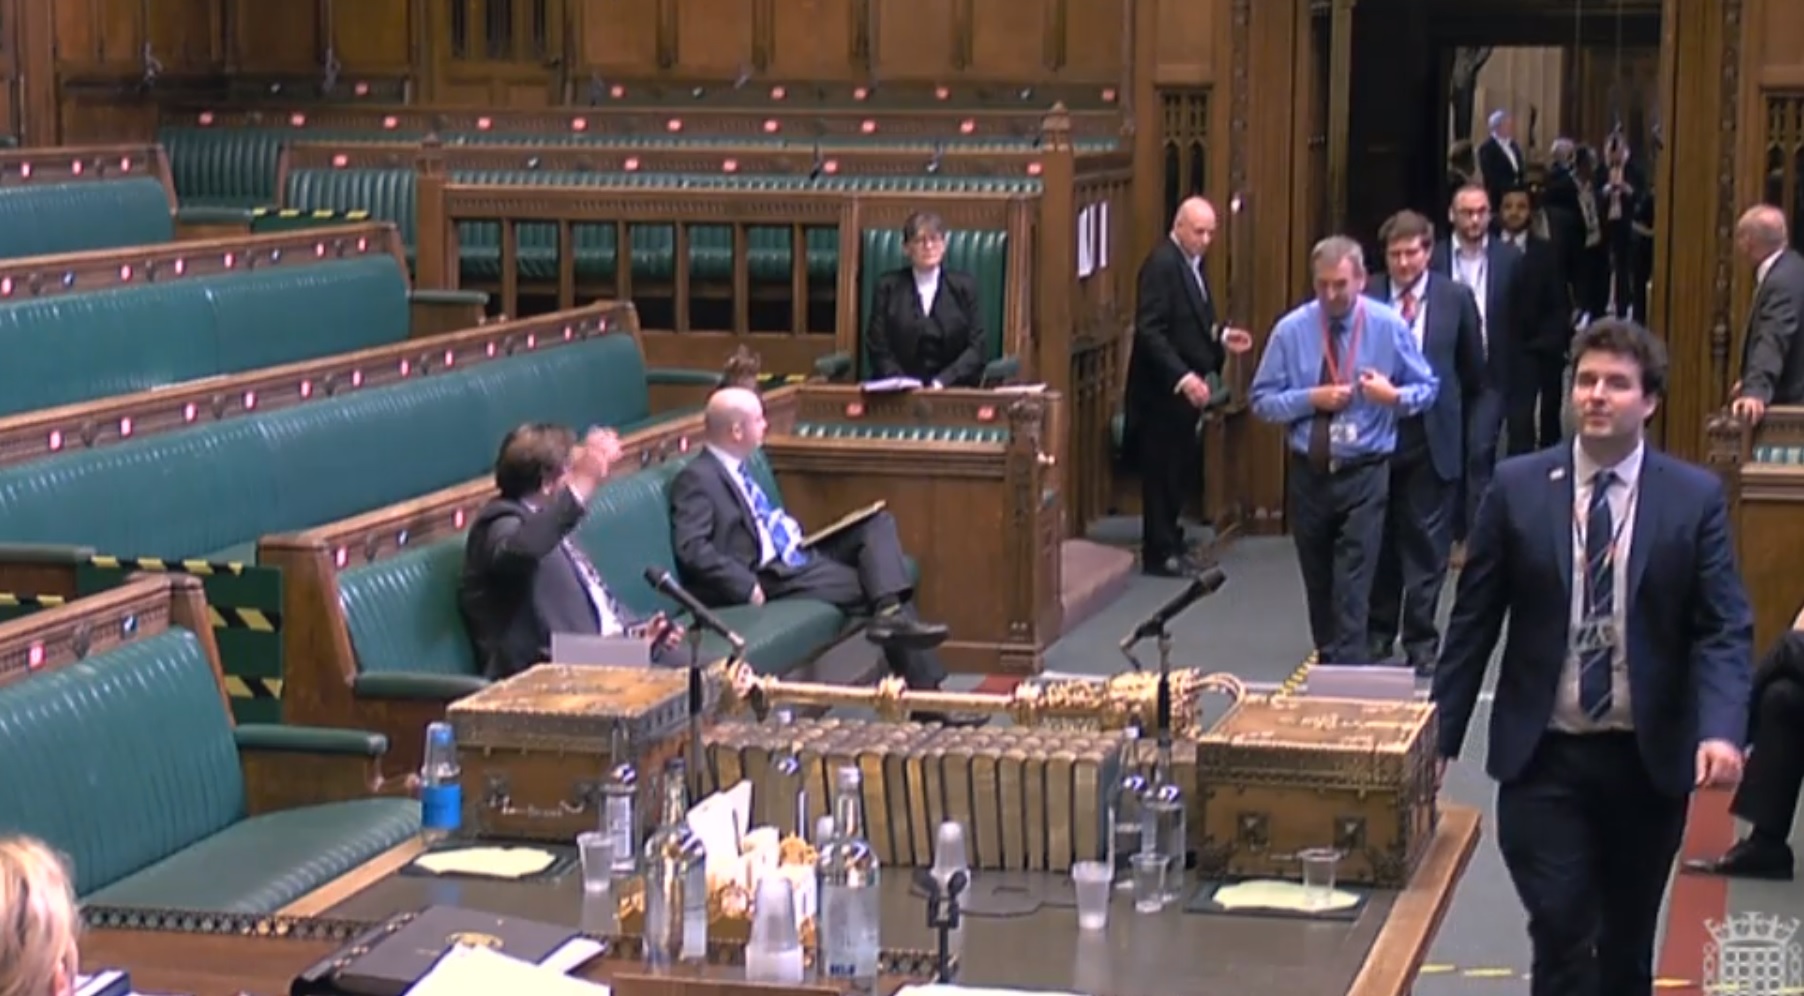 MPs are required to walk the length of the Commons chamber - and we have definitely seen that somewhere before.